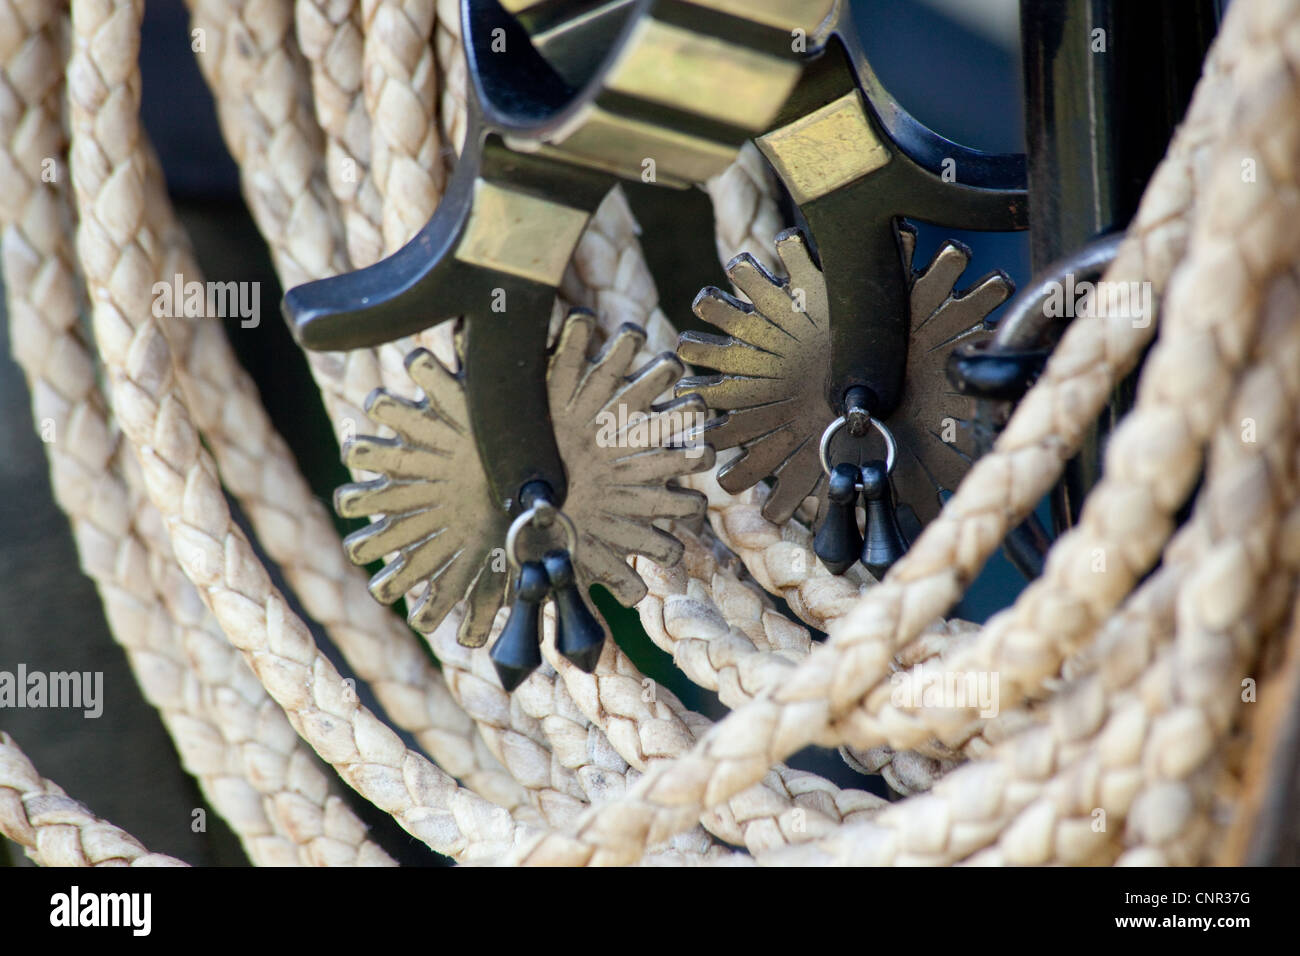 Cowboy tools, spurs and lasso, hanging and ready for use Stock Photo